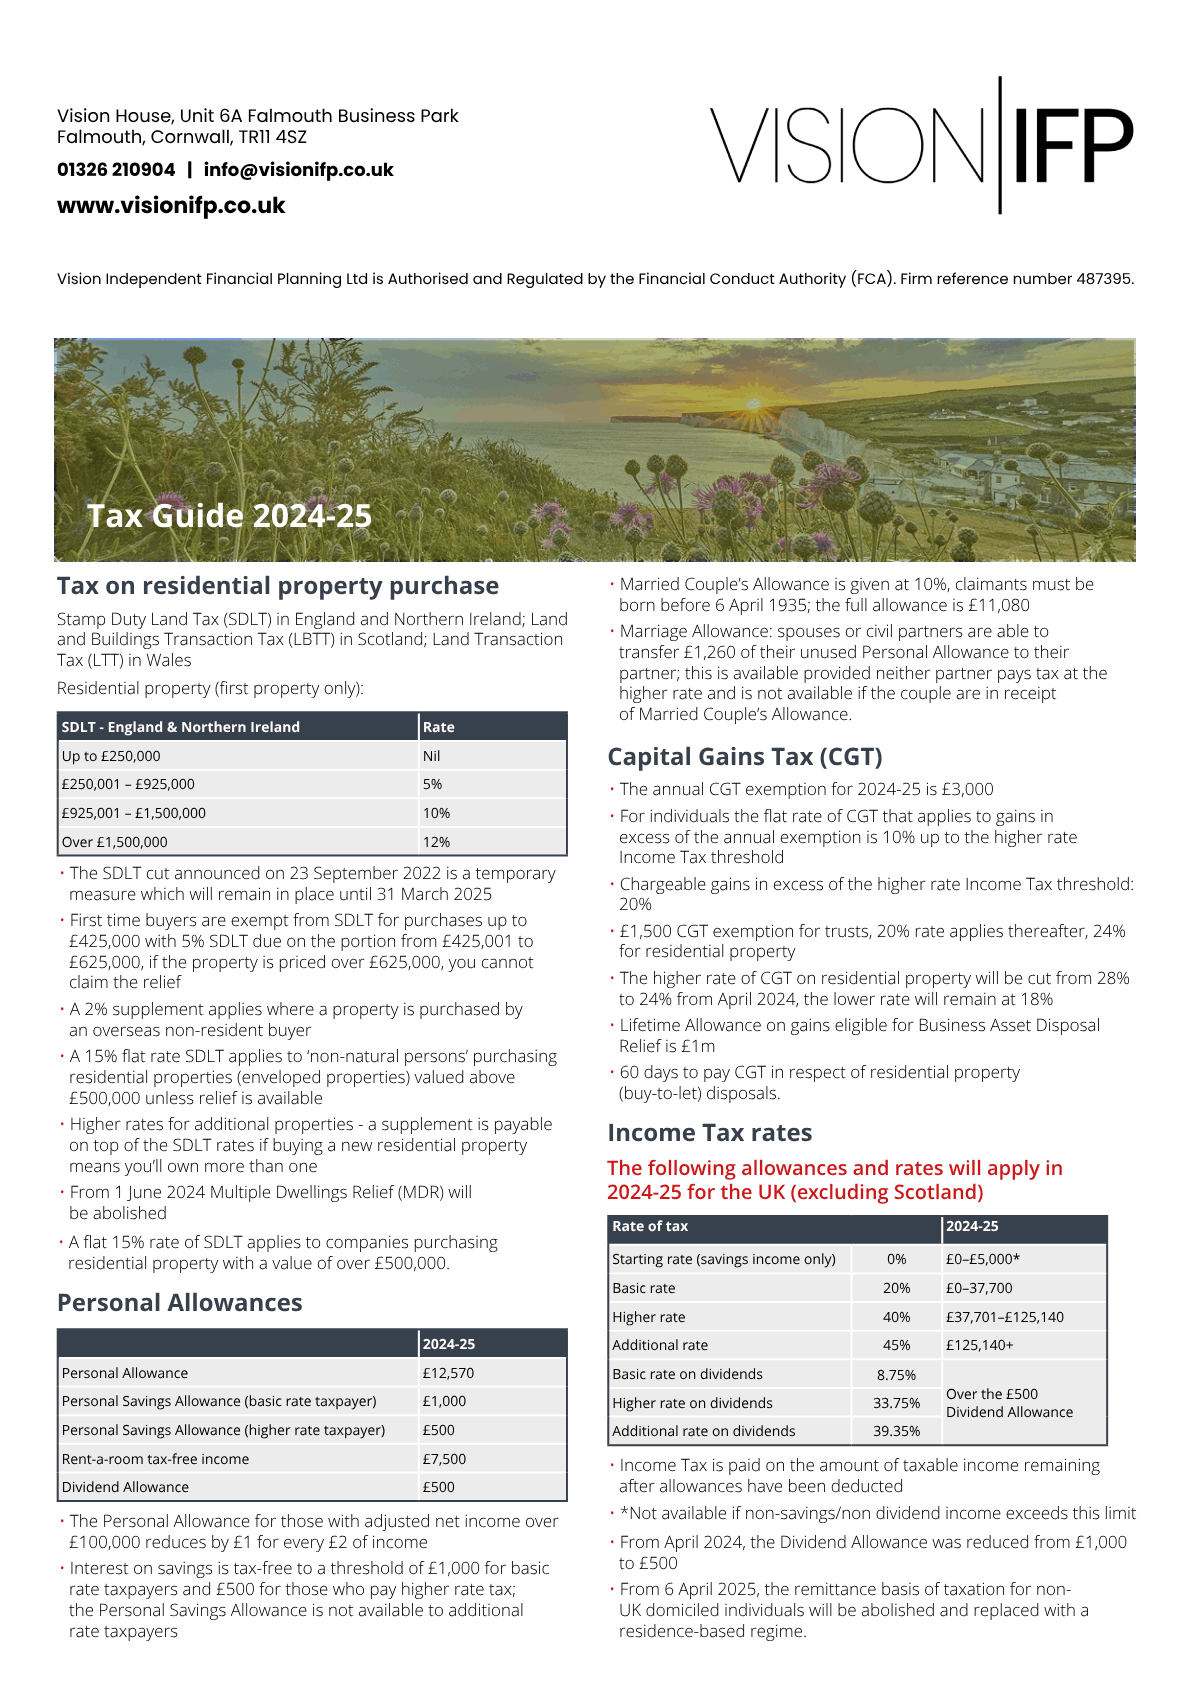 Tax Guide 2023-24